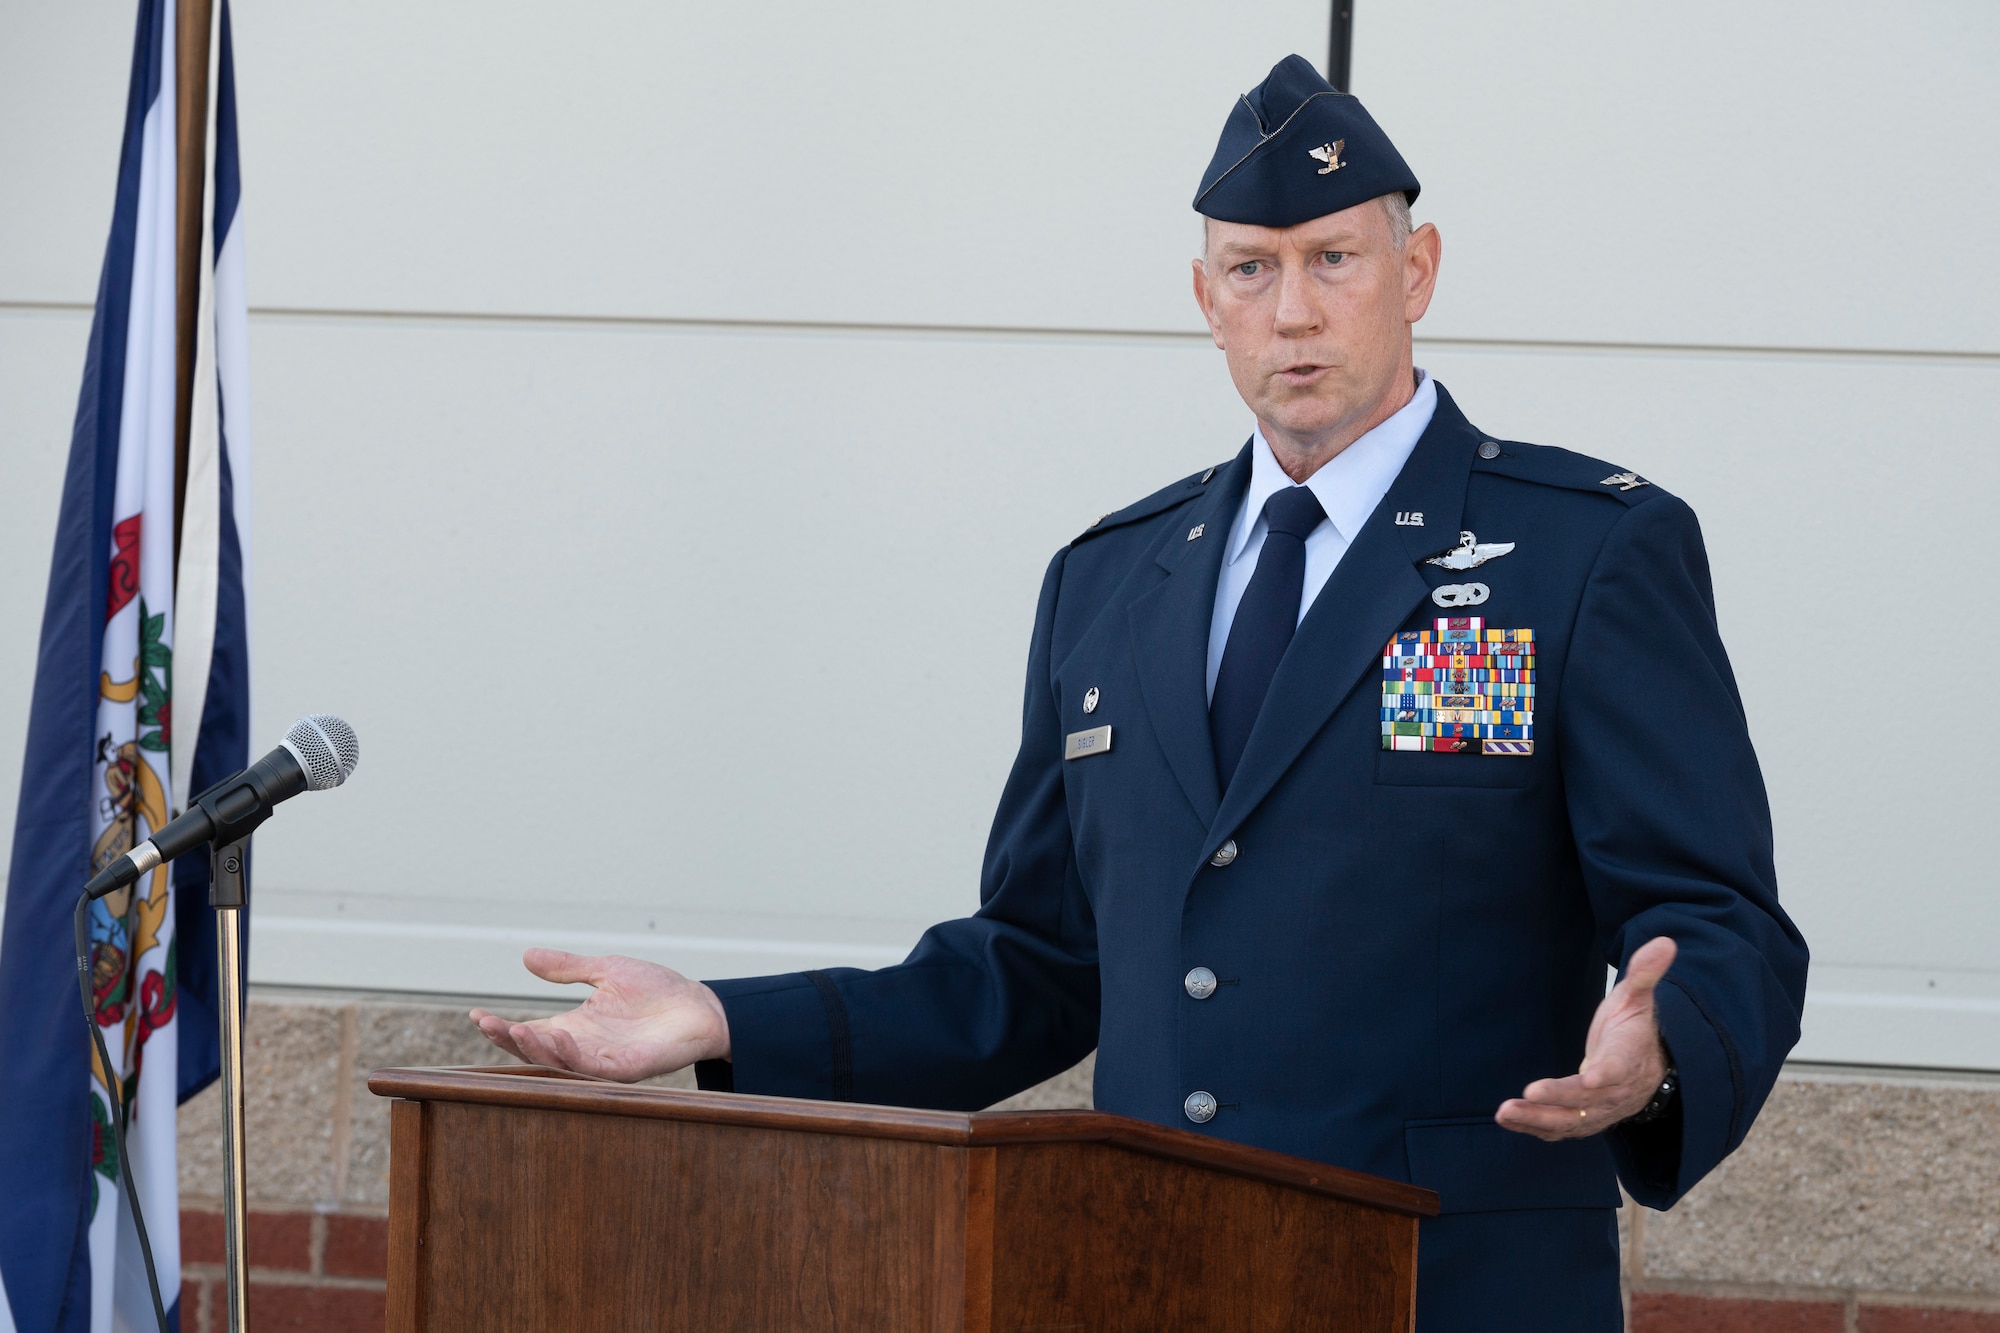 U.S. Air Force Col. Christopher Sigler, speaks during a ceremony to honor the crew of Decoy 81, who lost their lives in an aircraft crash 30 years ago. The ceremony was held in front of the 167th Operations Group building at the 167th Airlift Wing, Martinsburg West Virginia, Oct. 7, 2022.